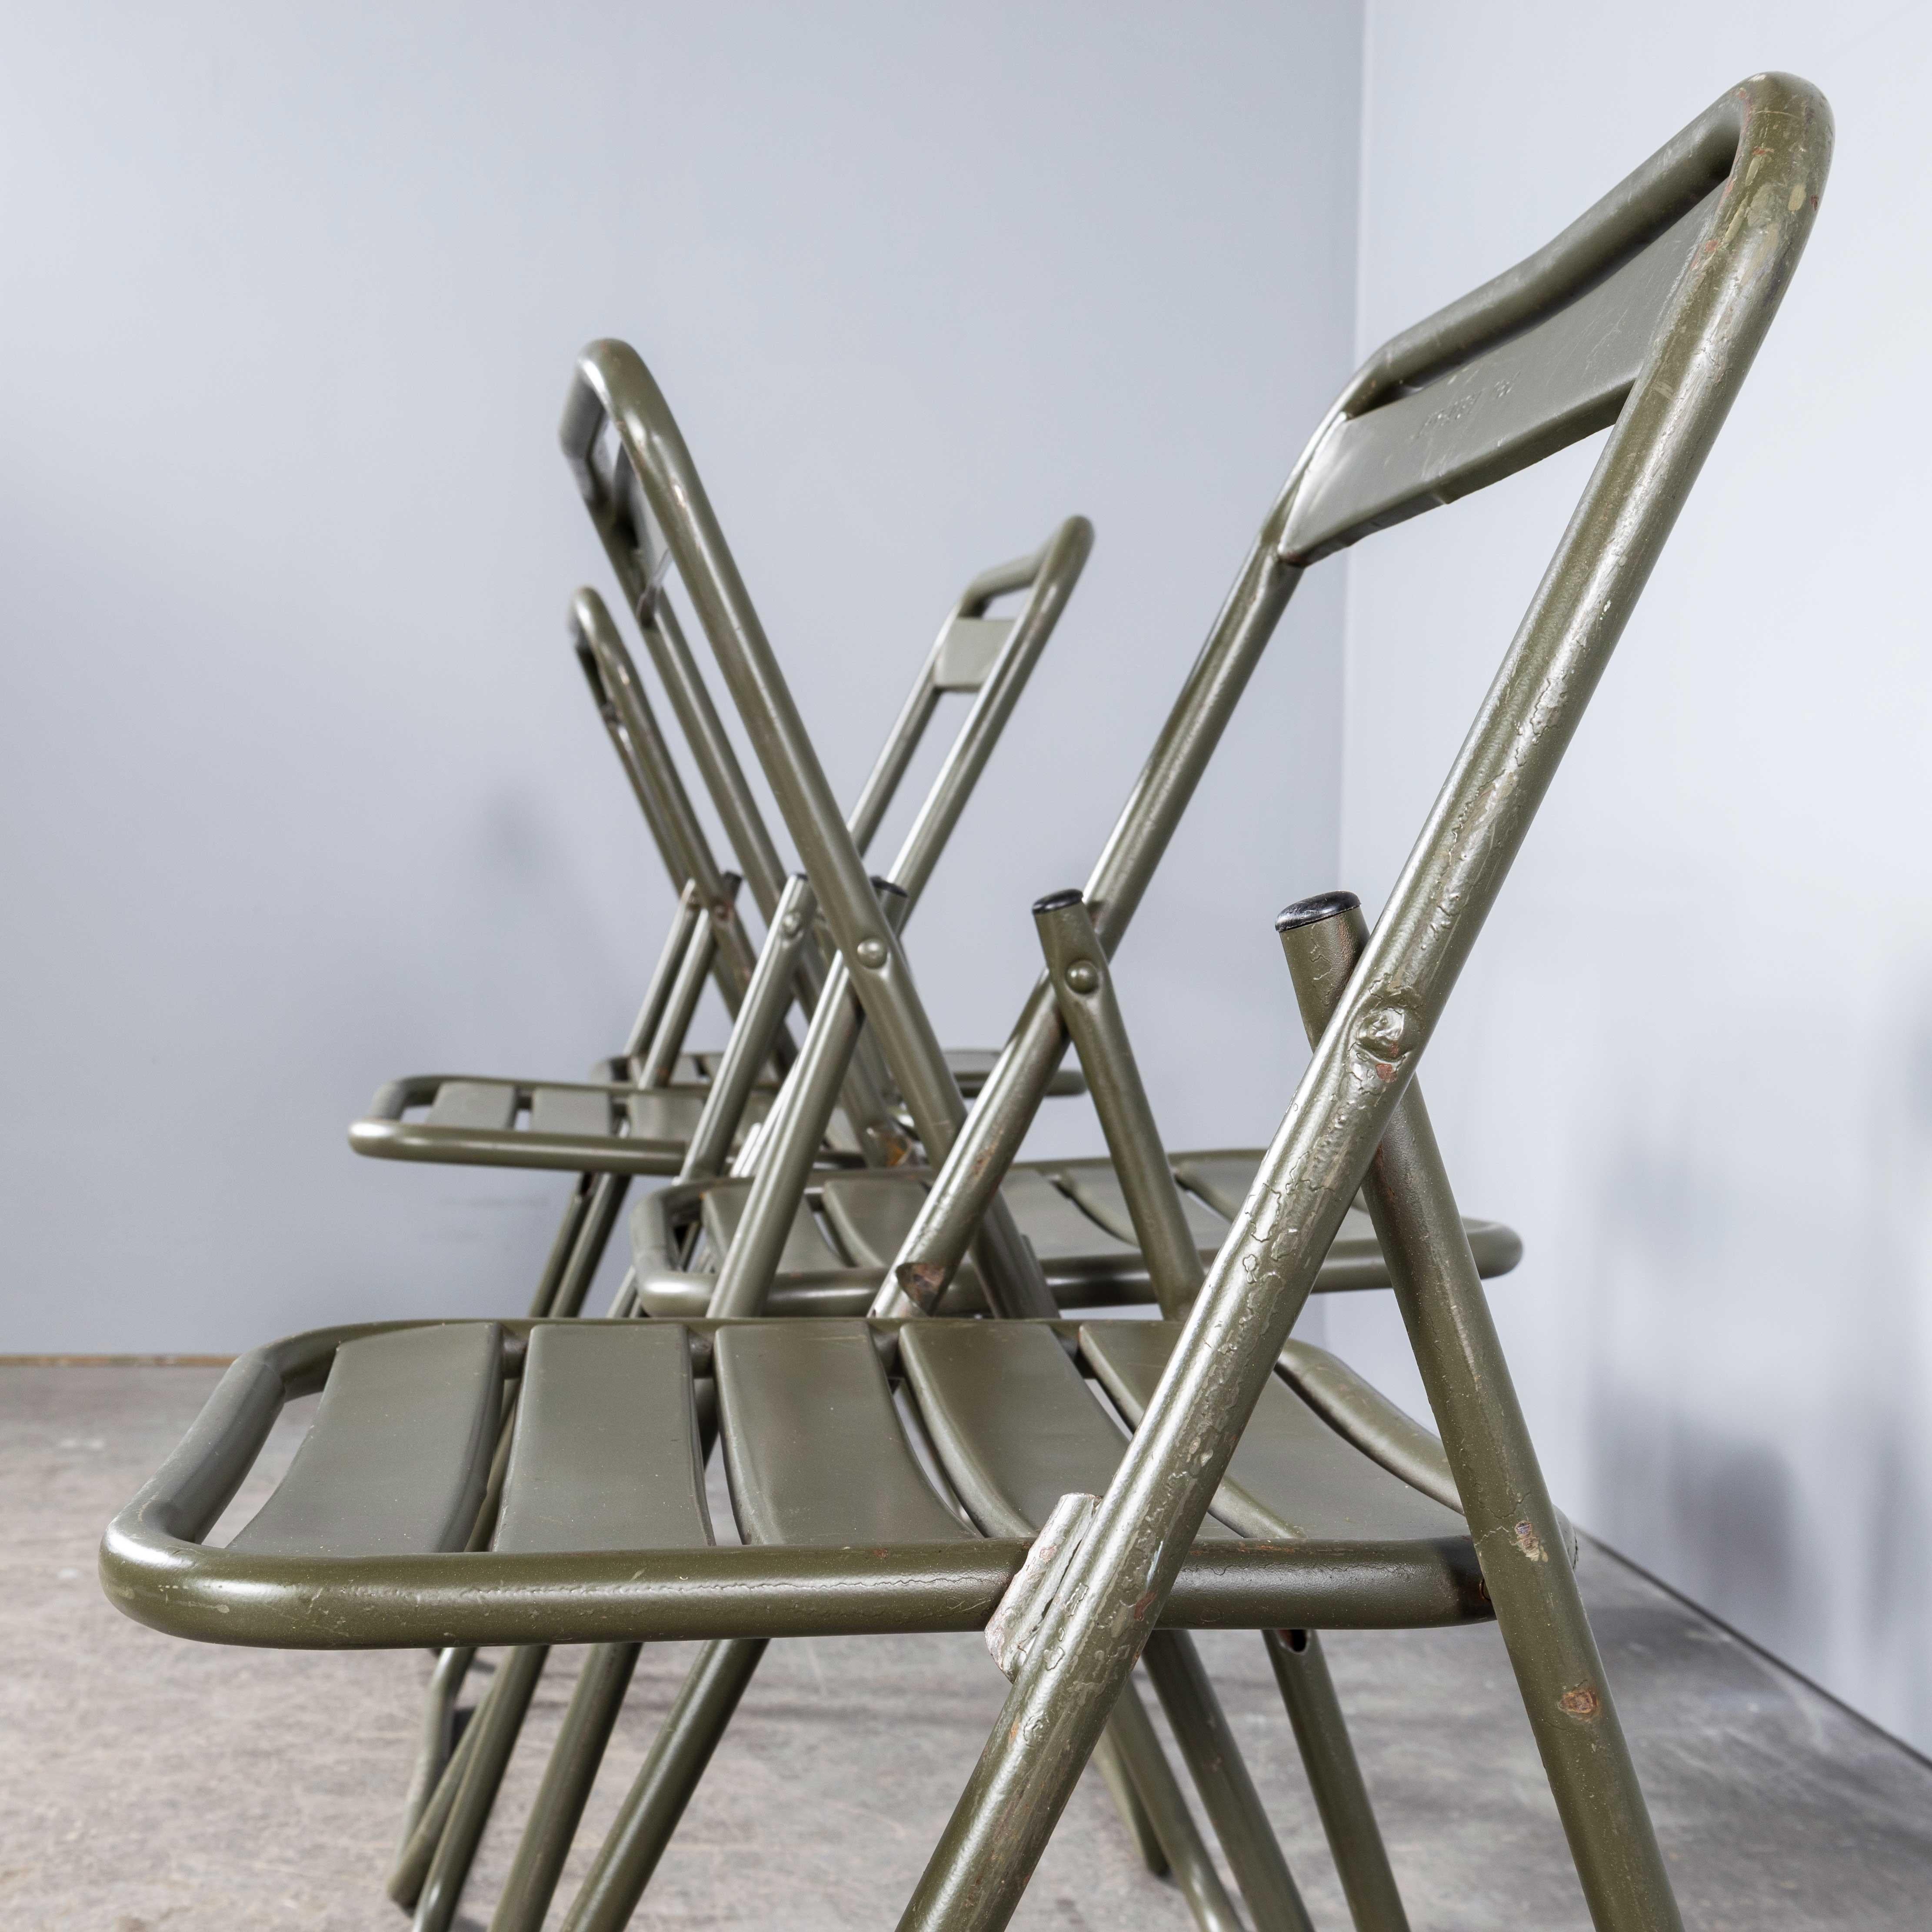 1970's New Old Stock Original French Army Surplus Folding Chairs - Very Large Qu For Sale 8